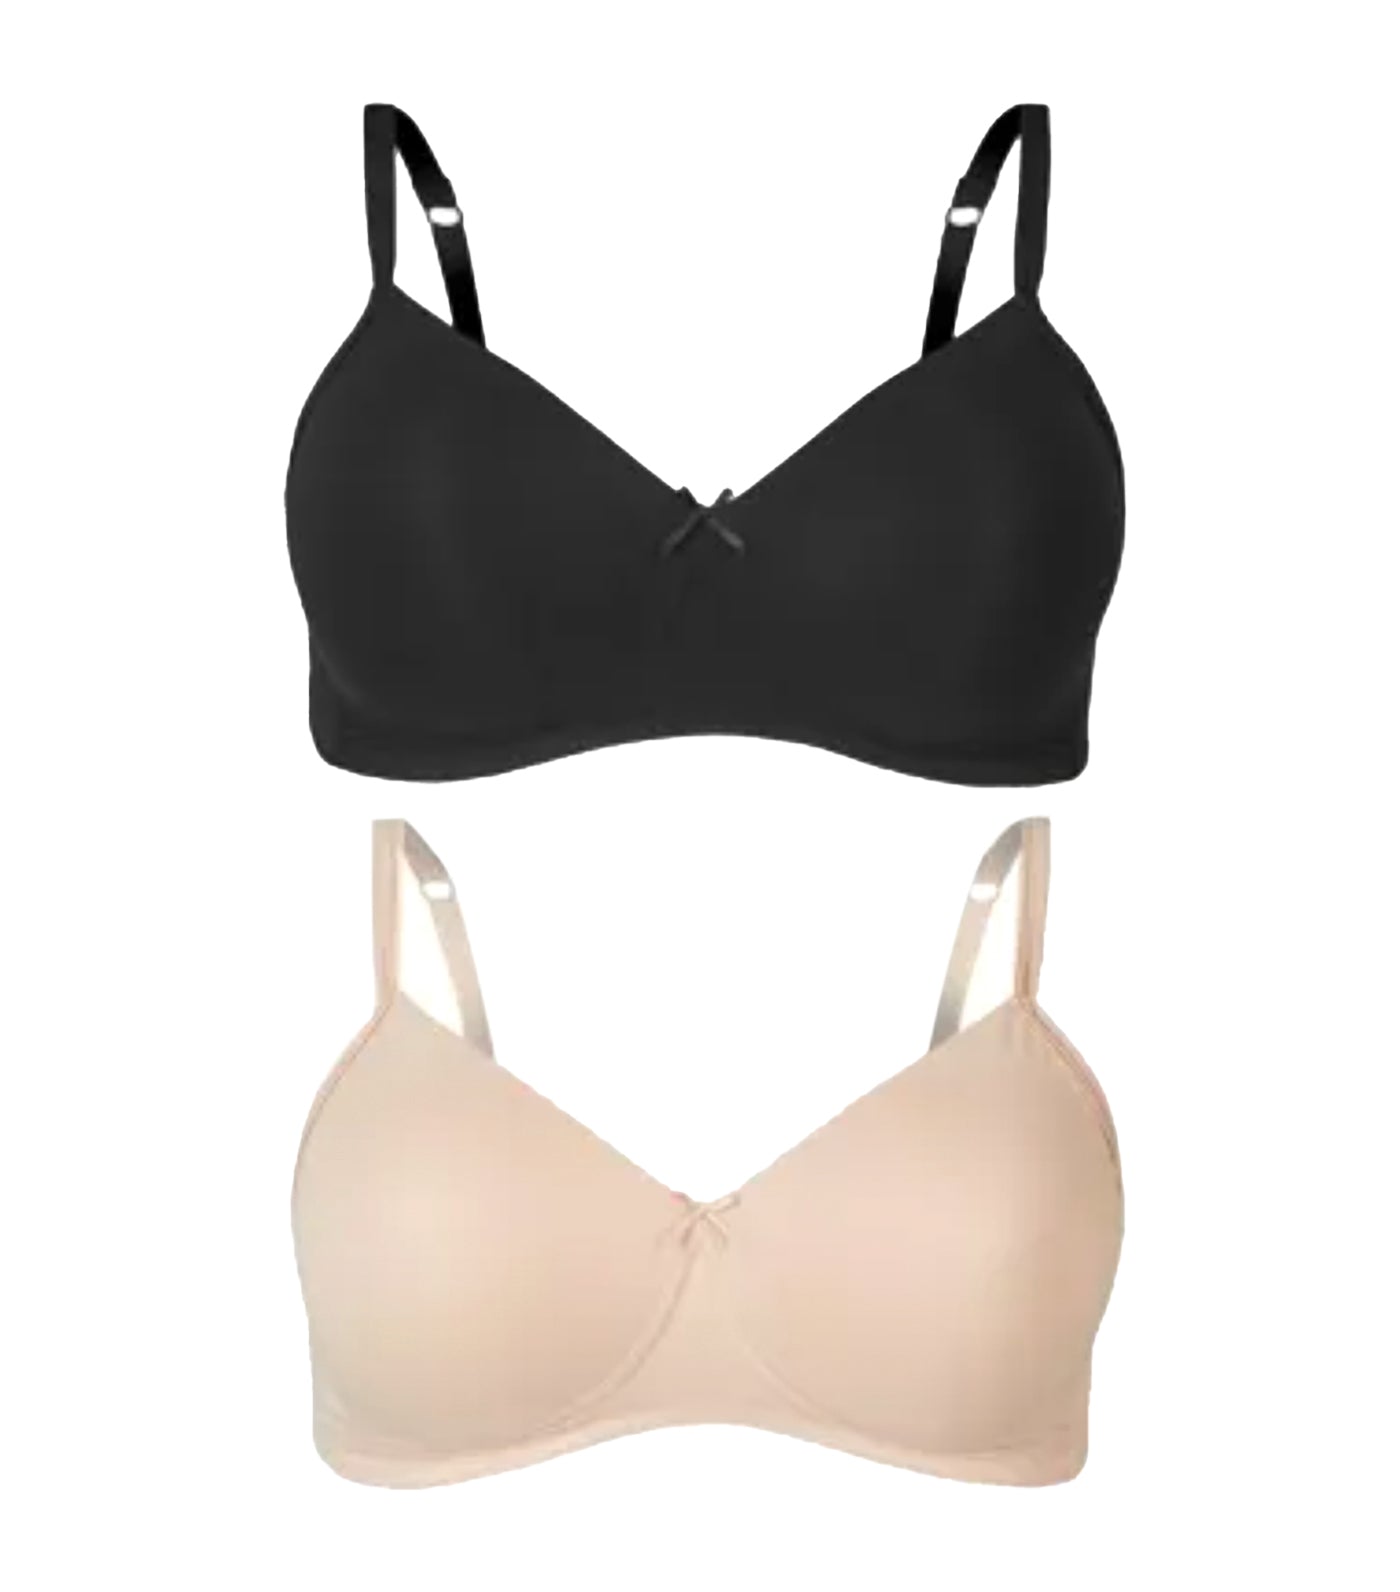 marks and spencer 2 pack cotton rich padded full cup bras - black and beige